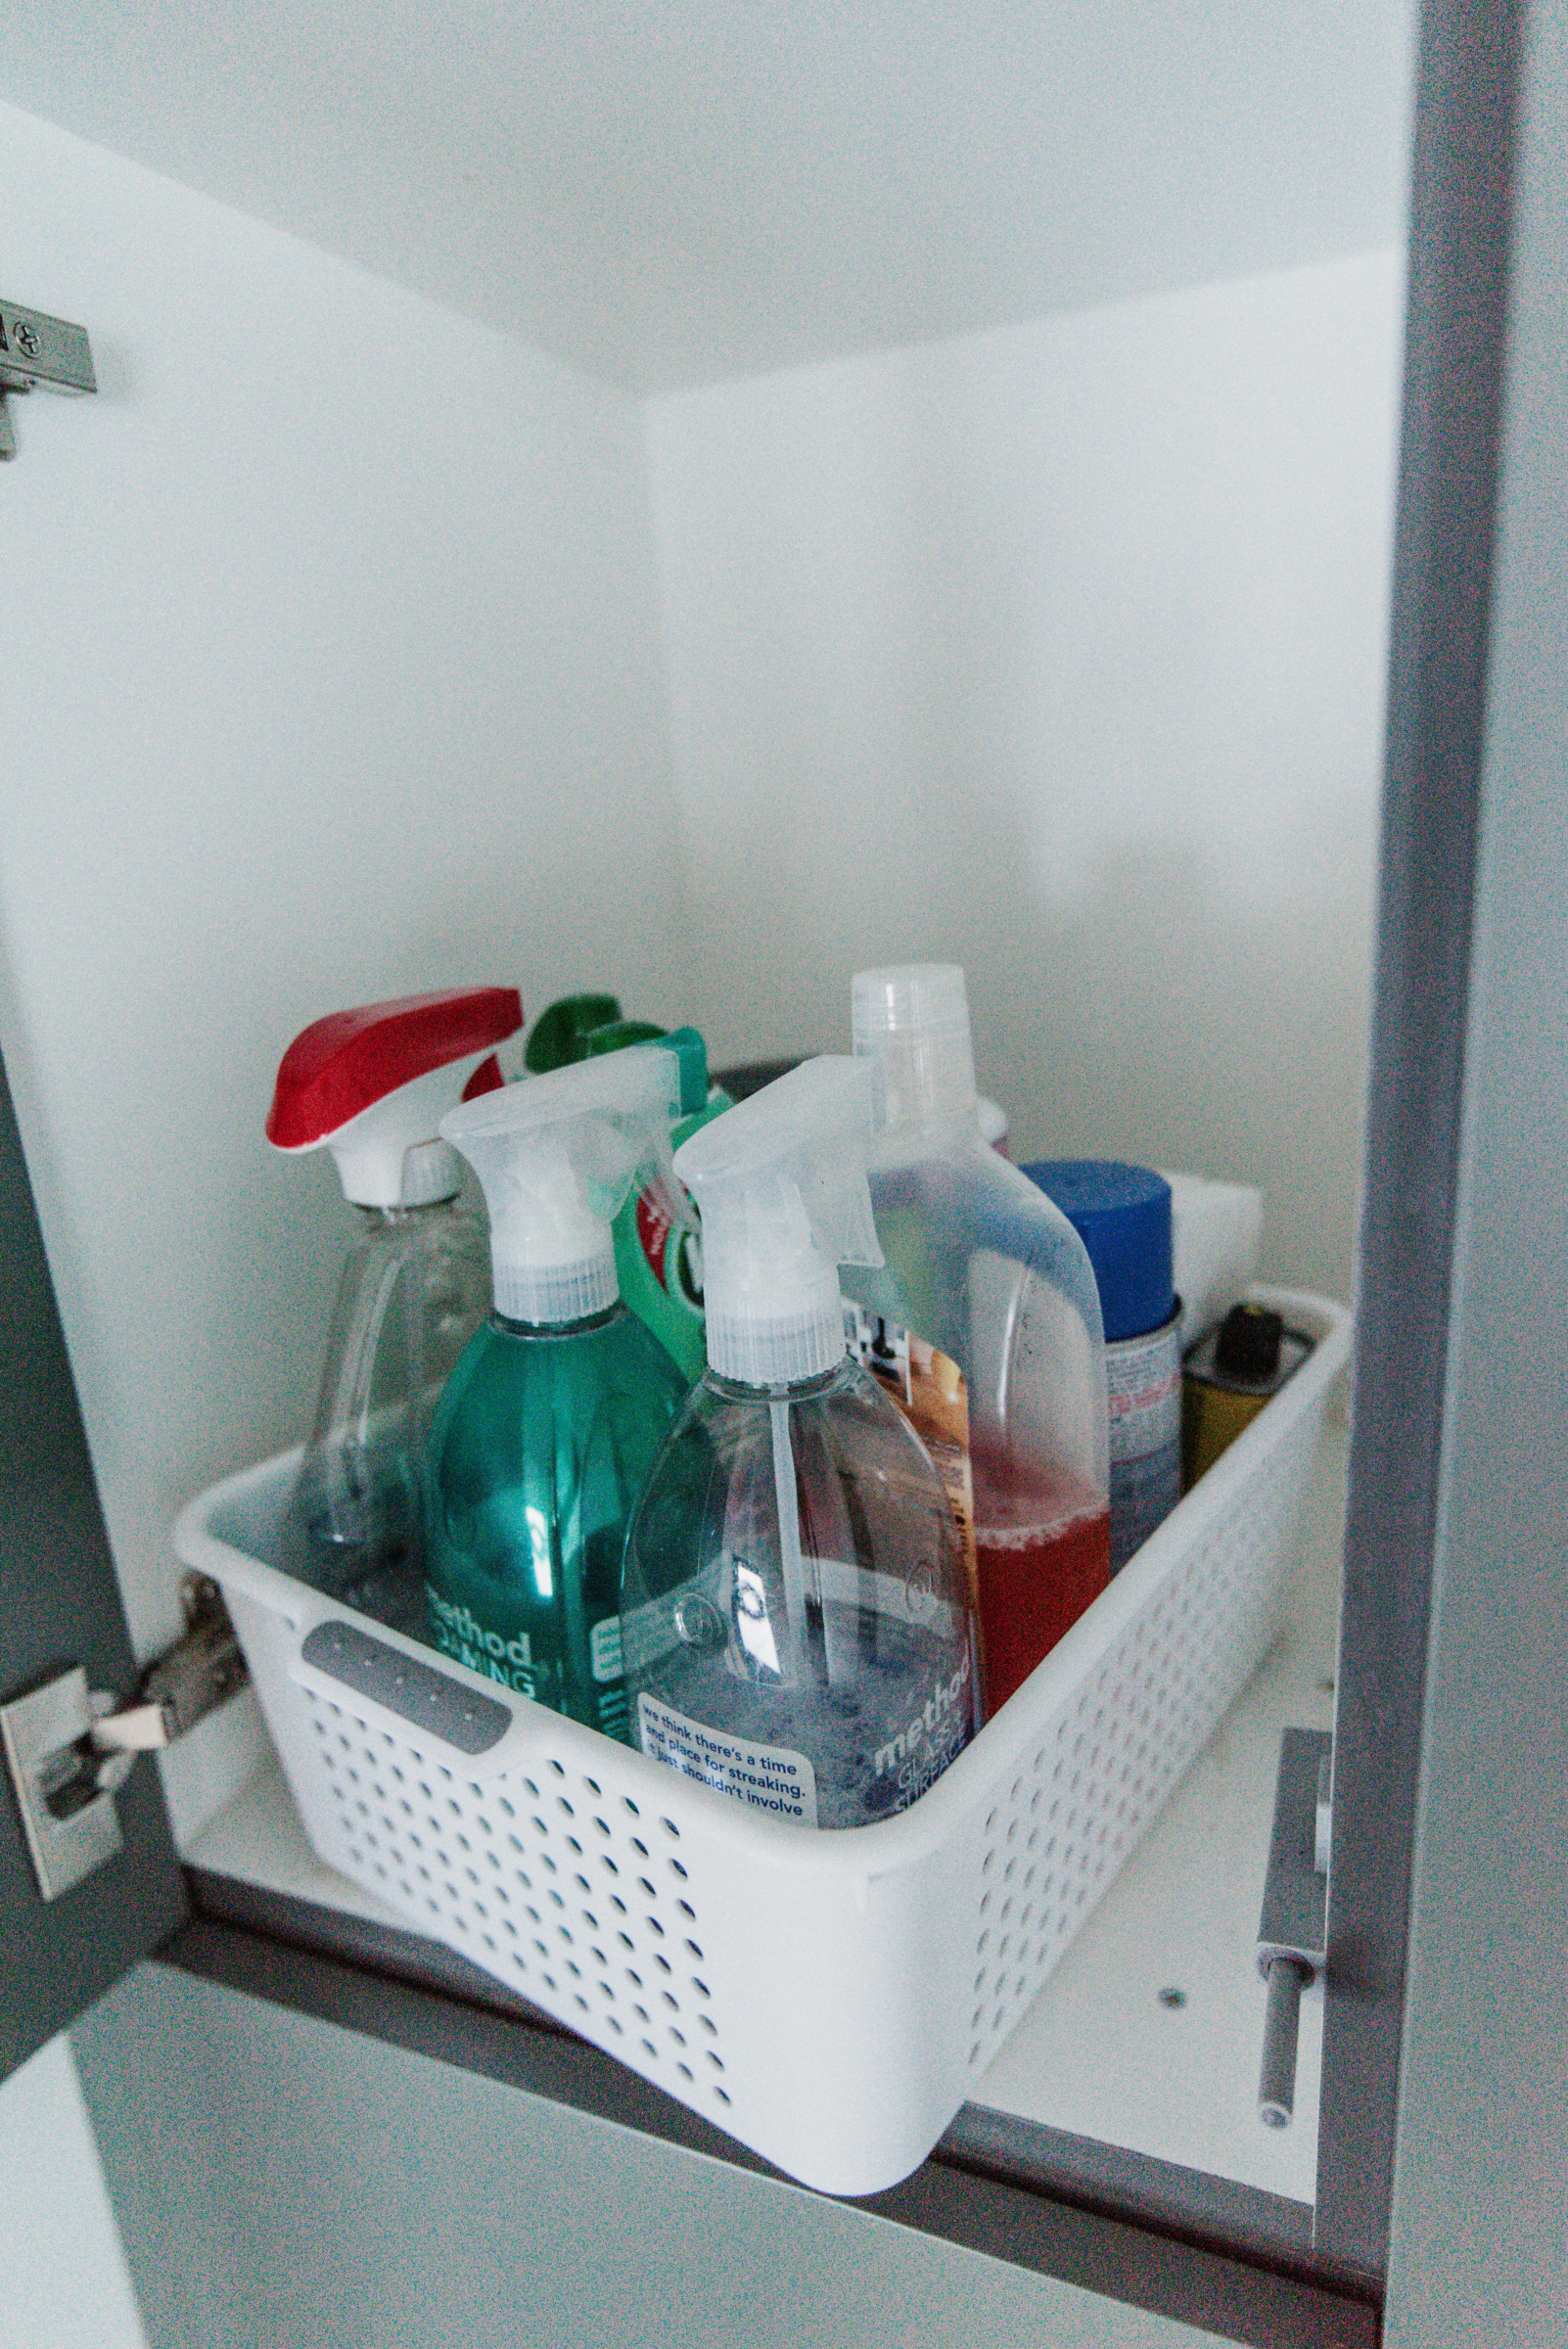 cleaners in a basket in a top cupboard